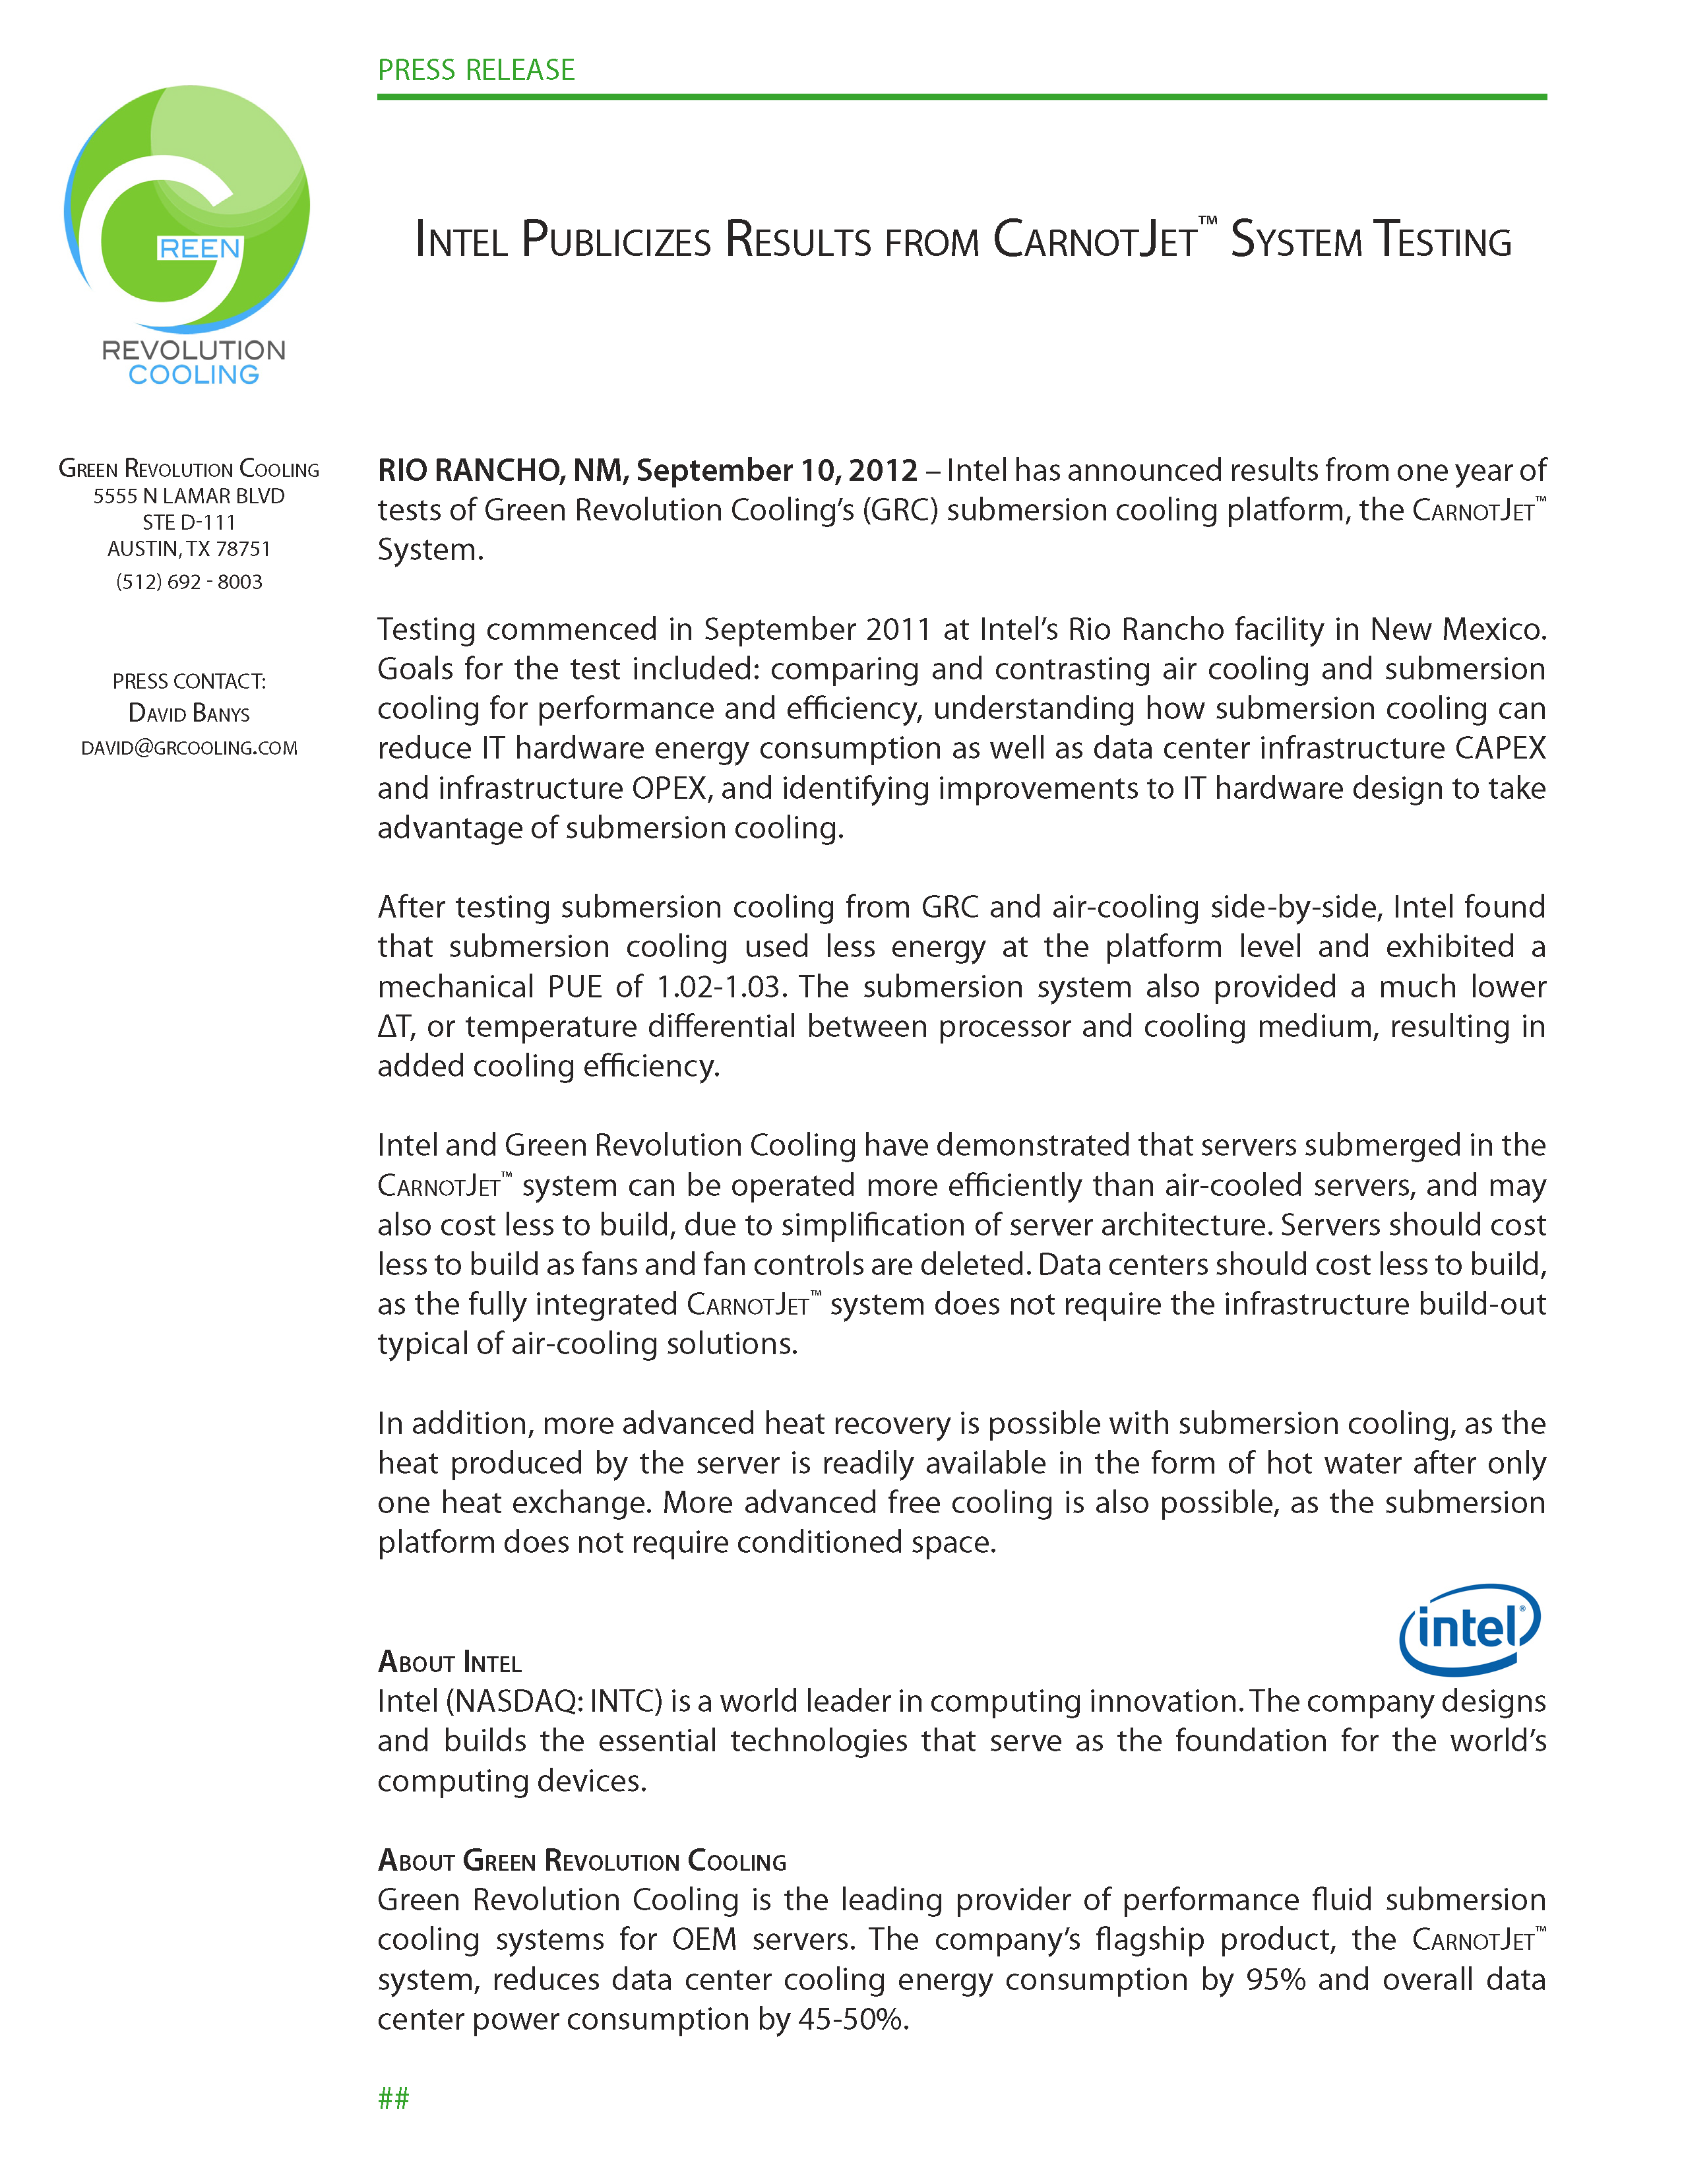 Intel Publicizes Results from CarnotJet System Testing